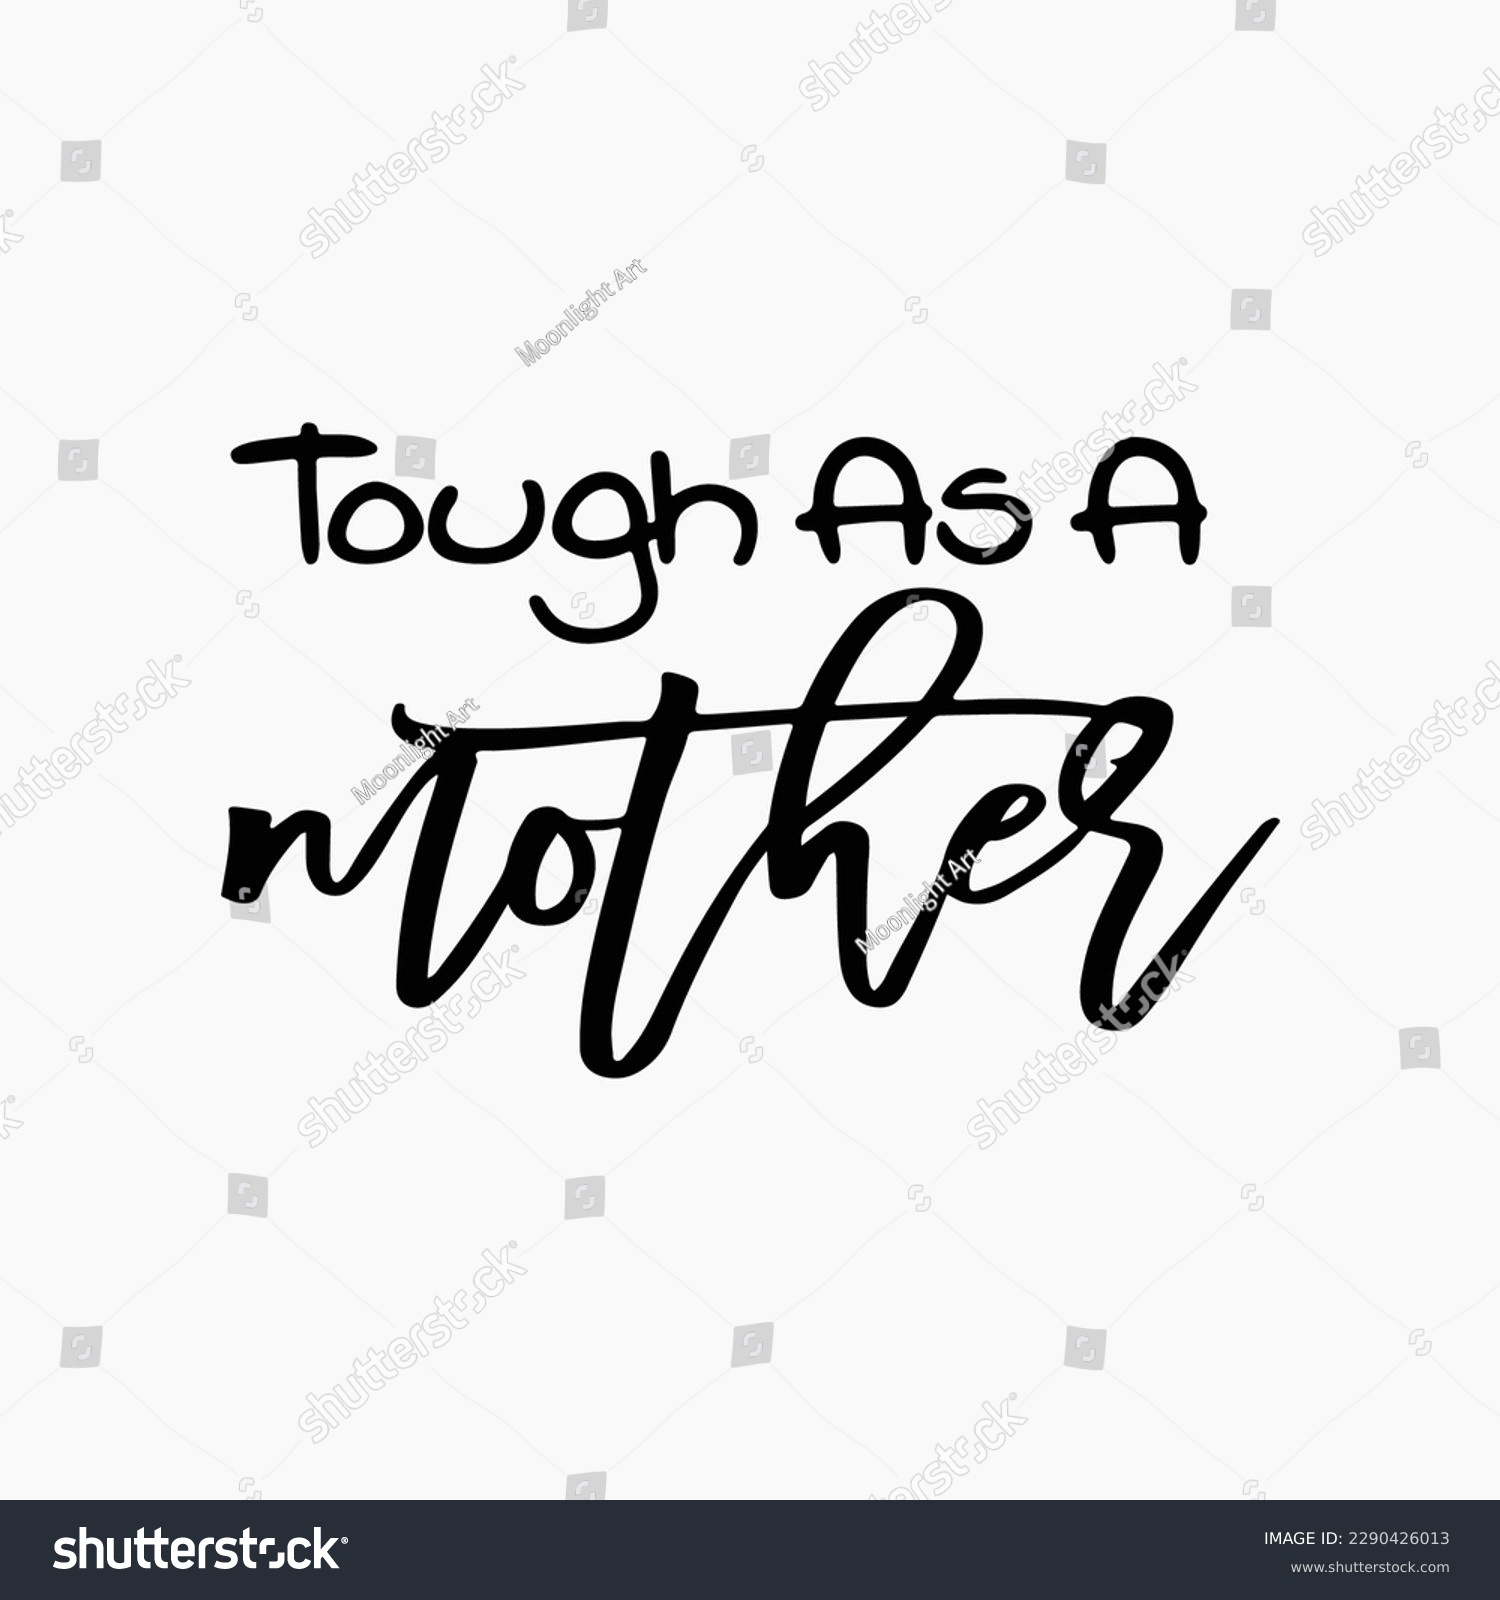 SVG of Tough As A Mother Svg, Mother Svg, Mama Boss Svg, Motherhood, Mom Quotes Sayings, Minimalist Design, Tumbler Sublimation PNG Design svg